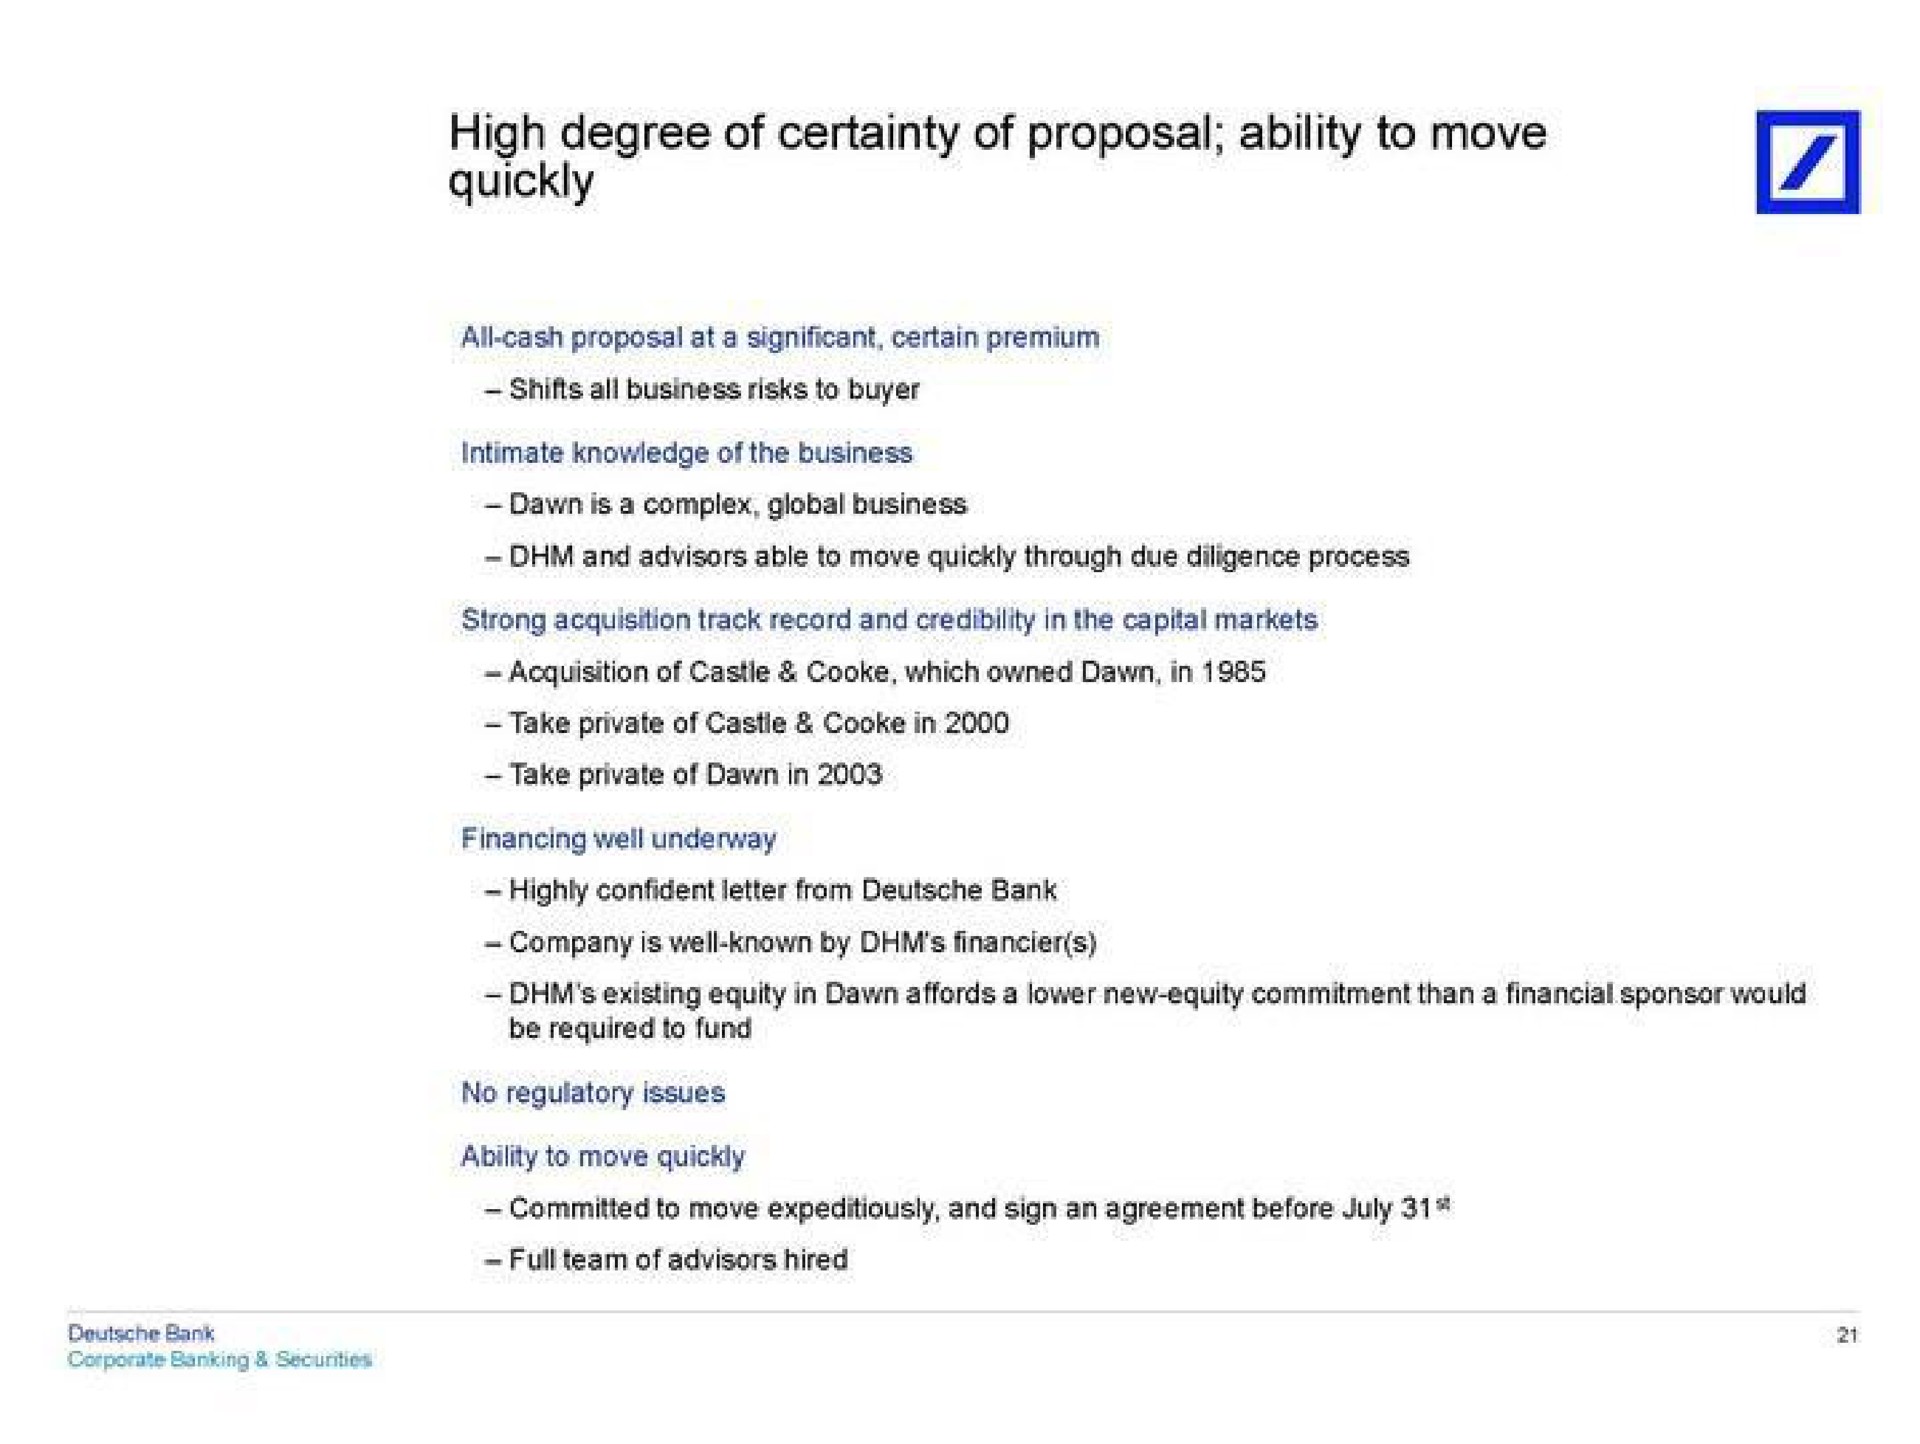 high degree of certainty of proposal ability to move quickly | Deutsche Bank